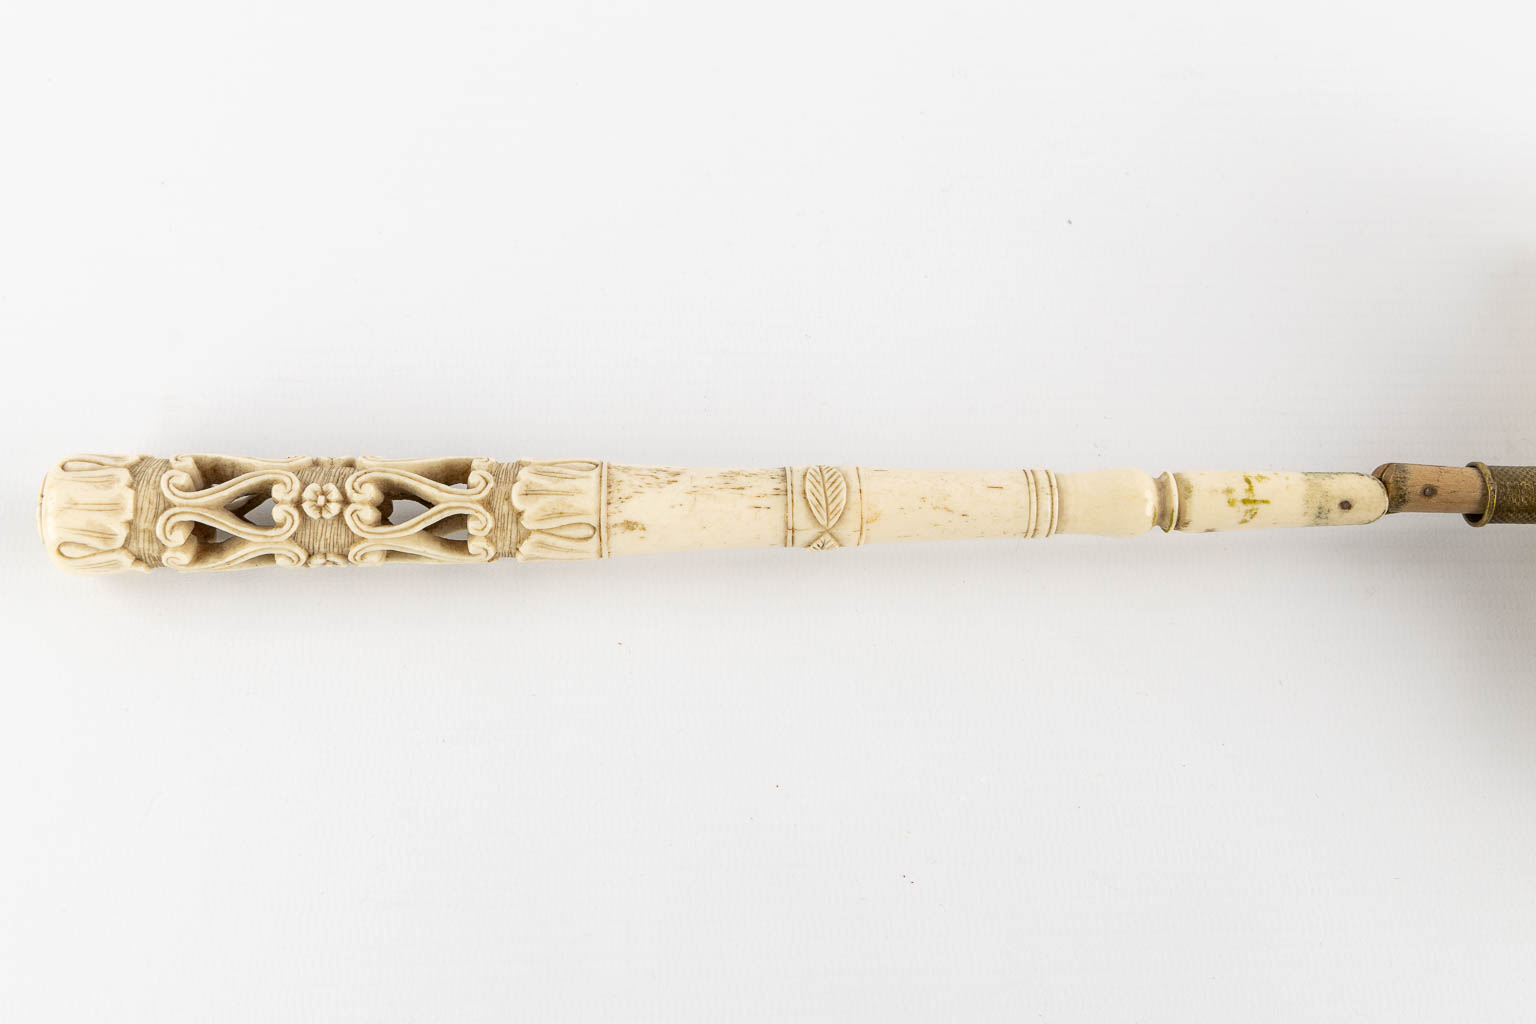 A sunshade with ivory handle, France, 19th C. (L:60 cm)